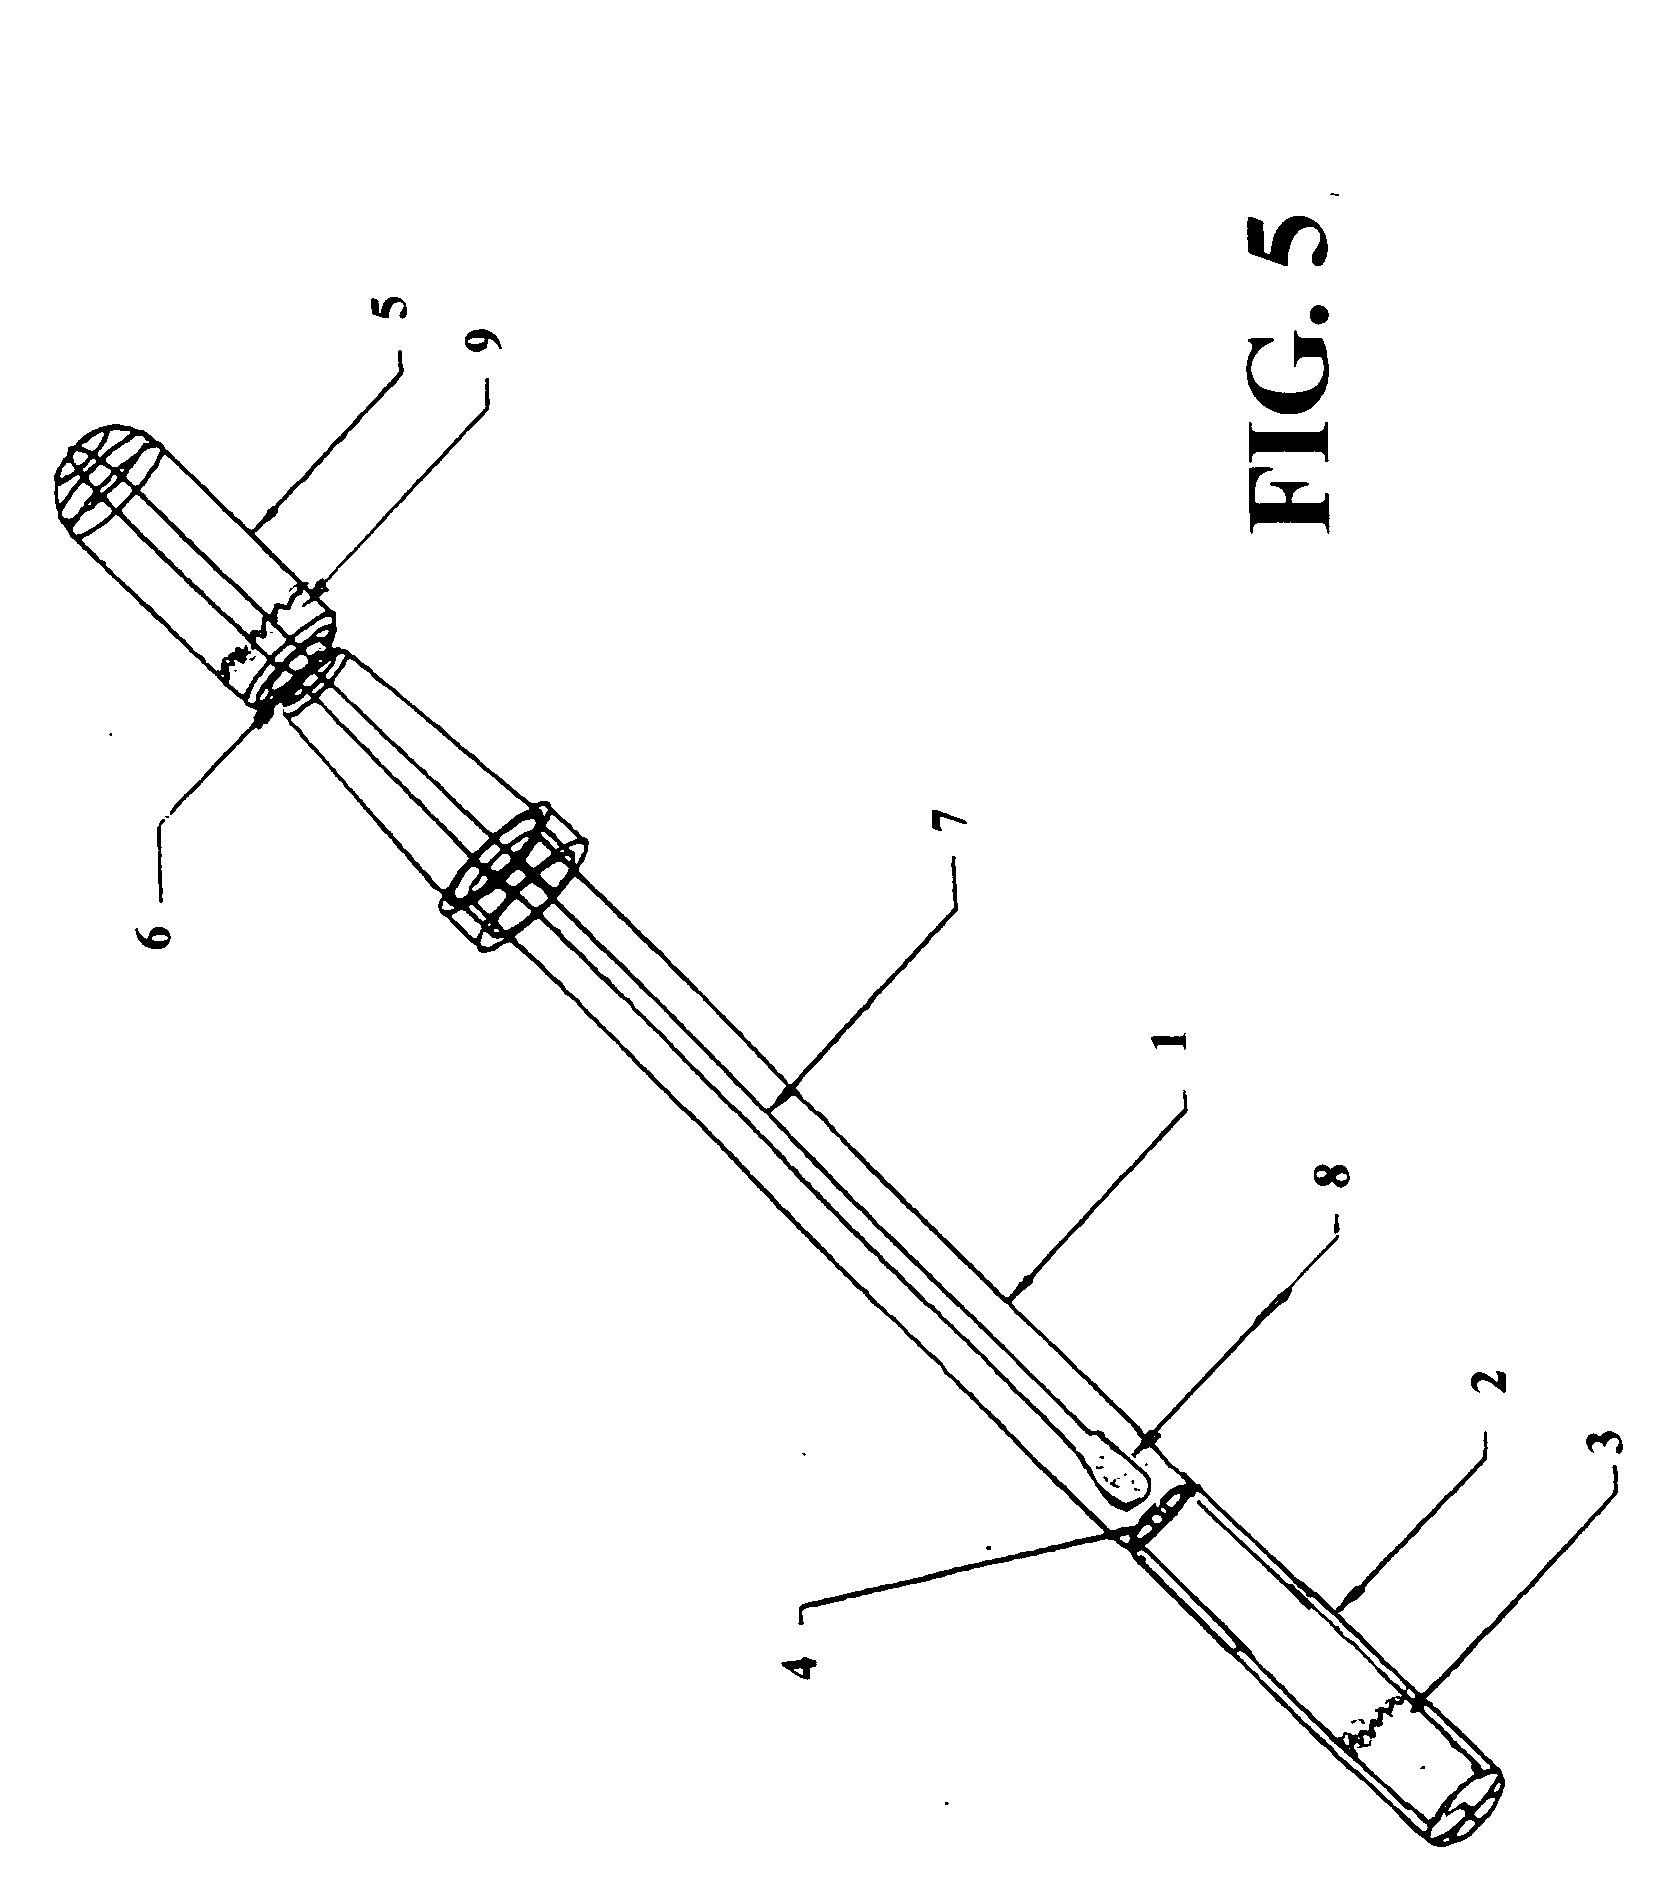 Methods and apparatus for the rapid detection of microorganisms collected from infected sites